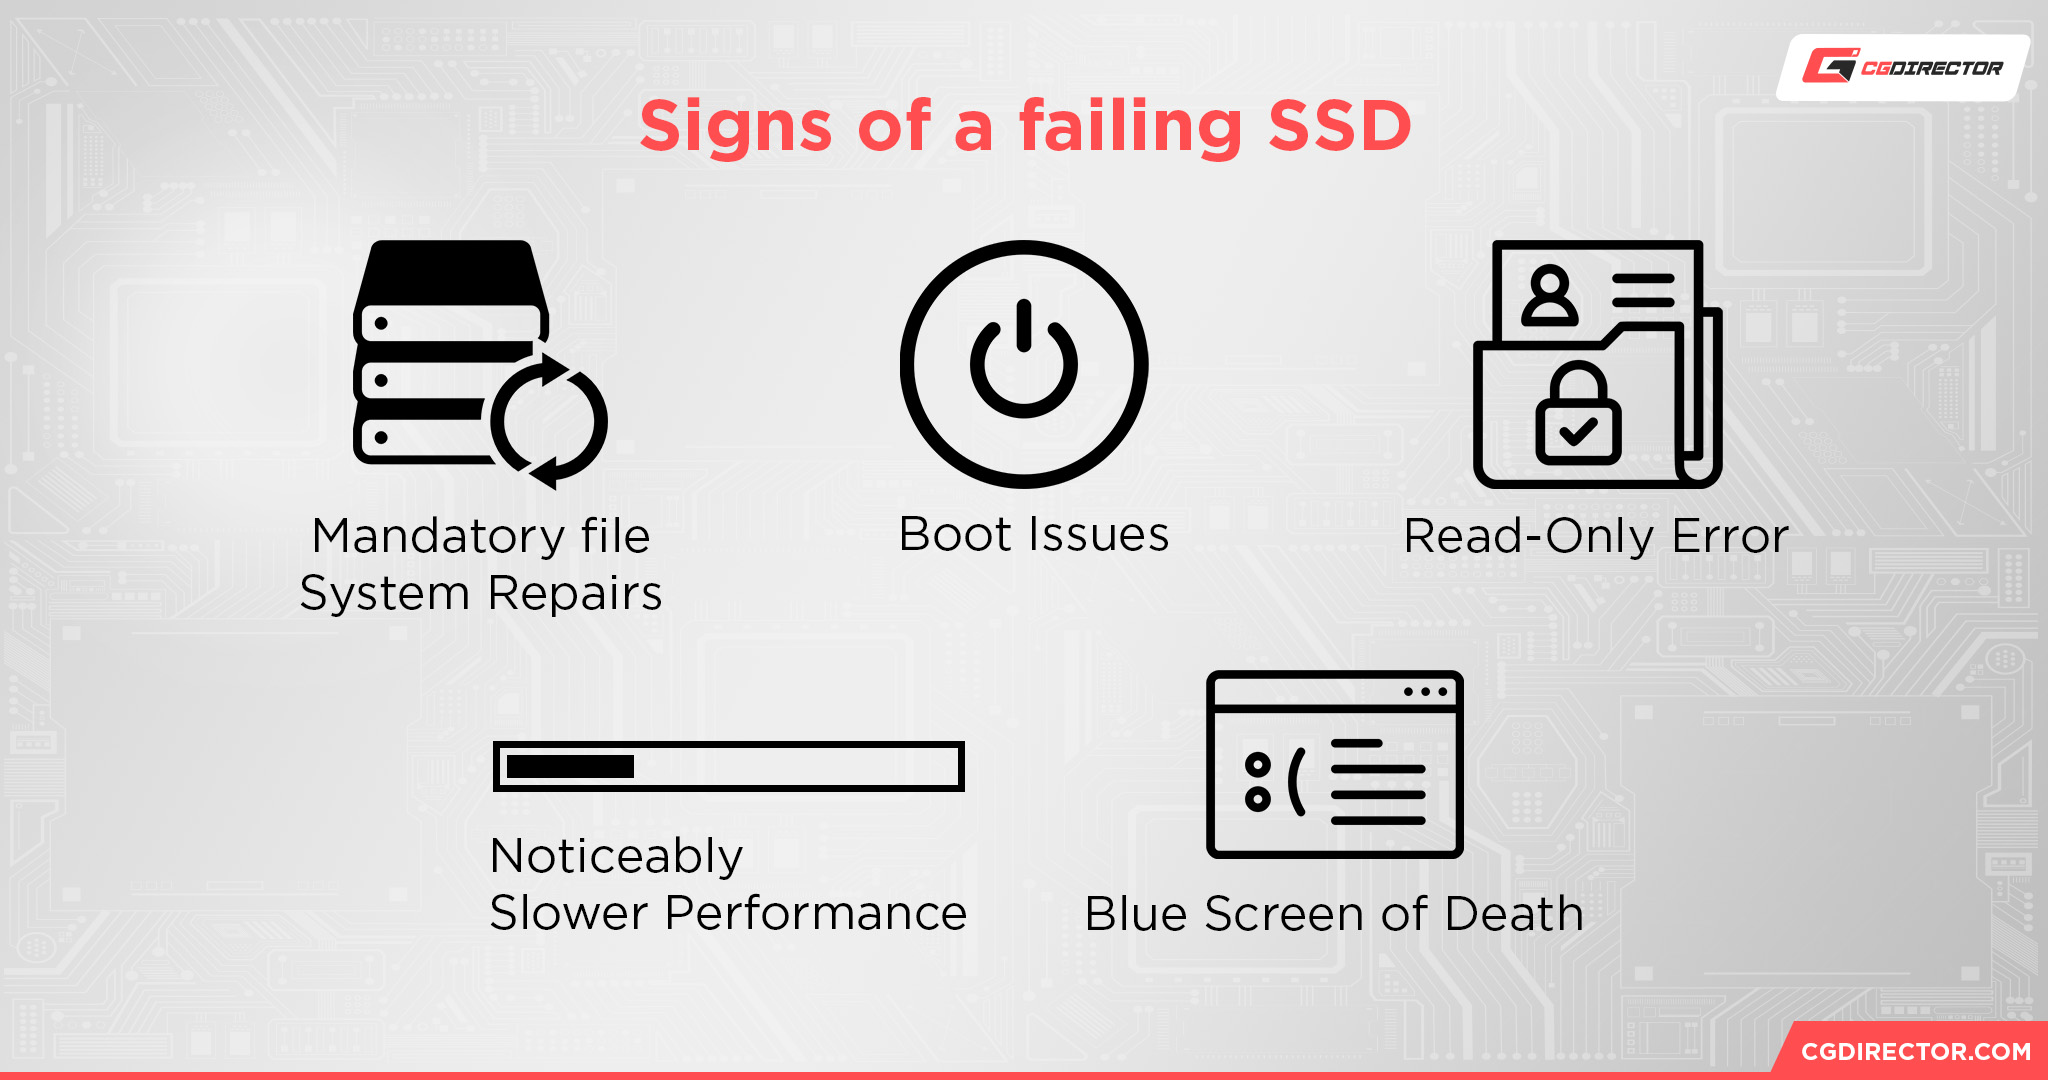 Signs of a failing SSD